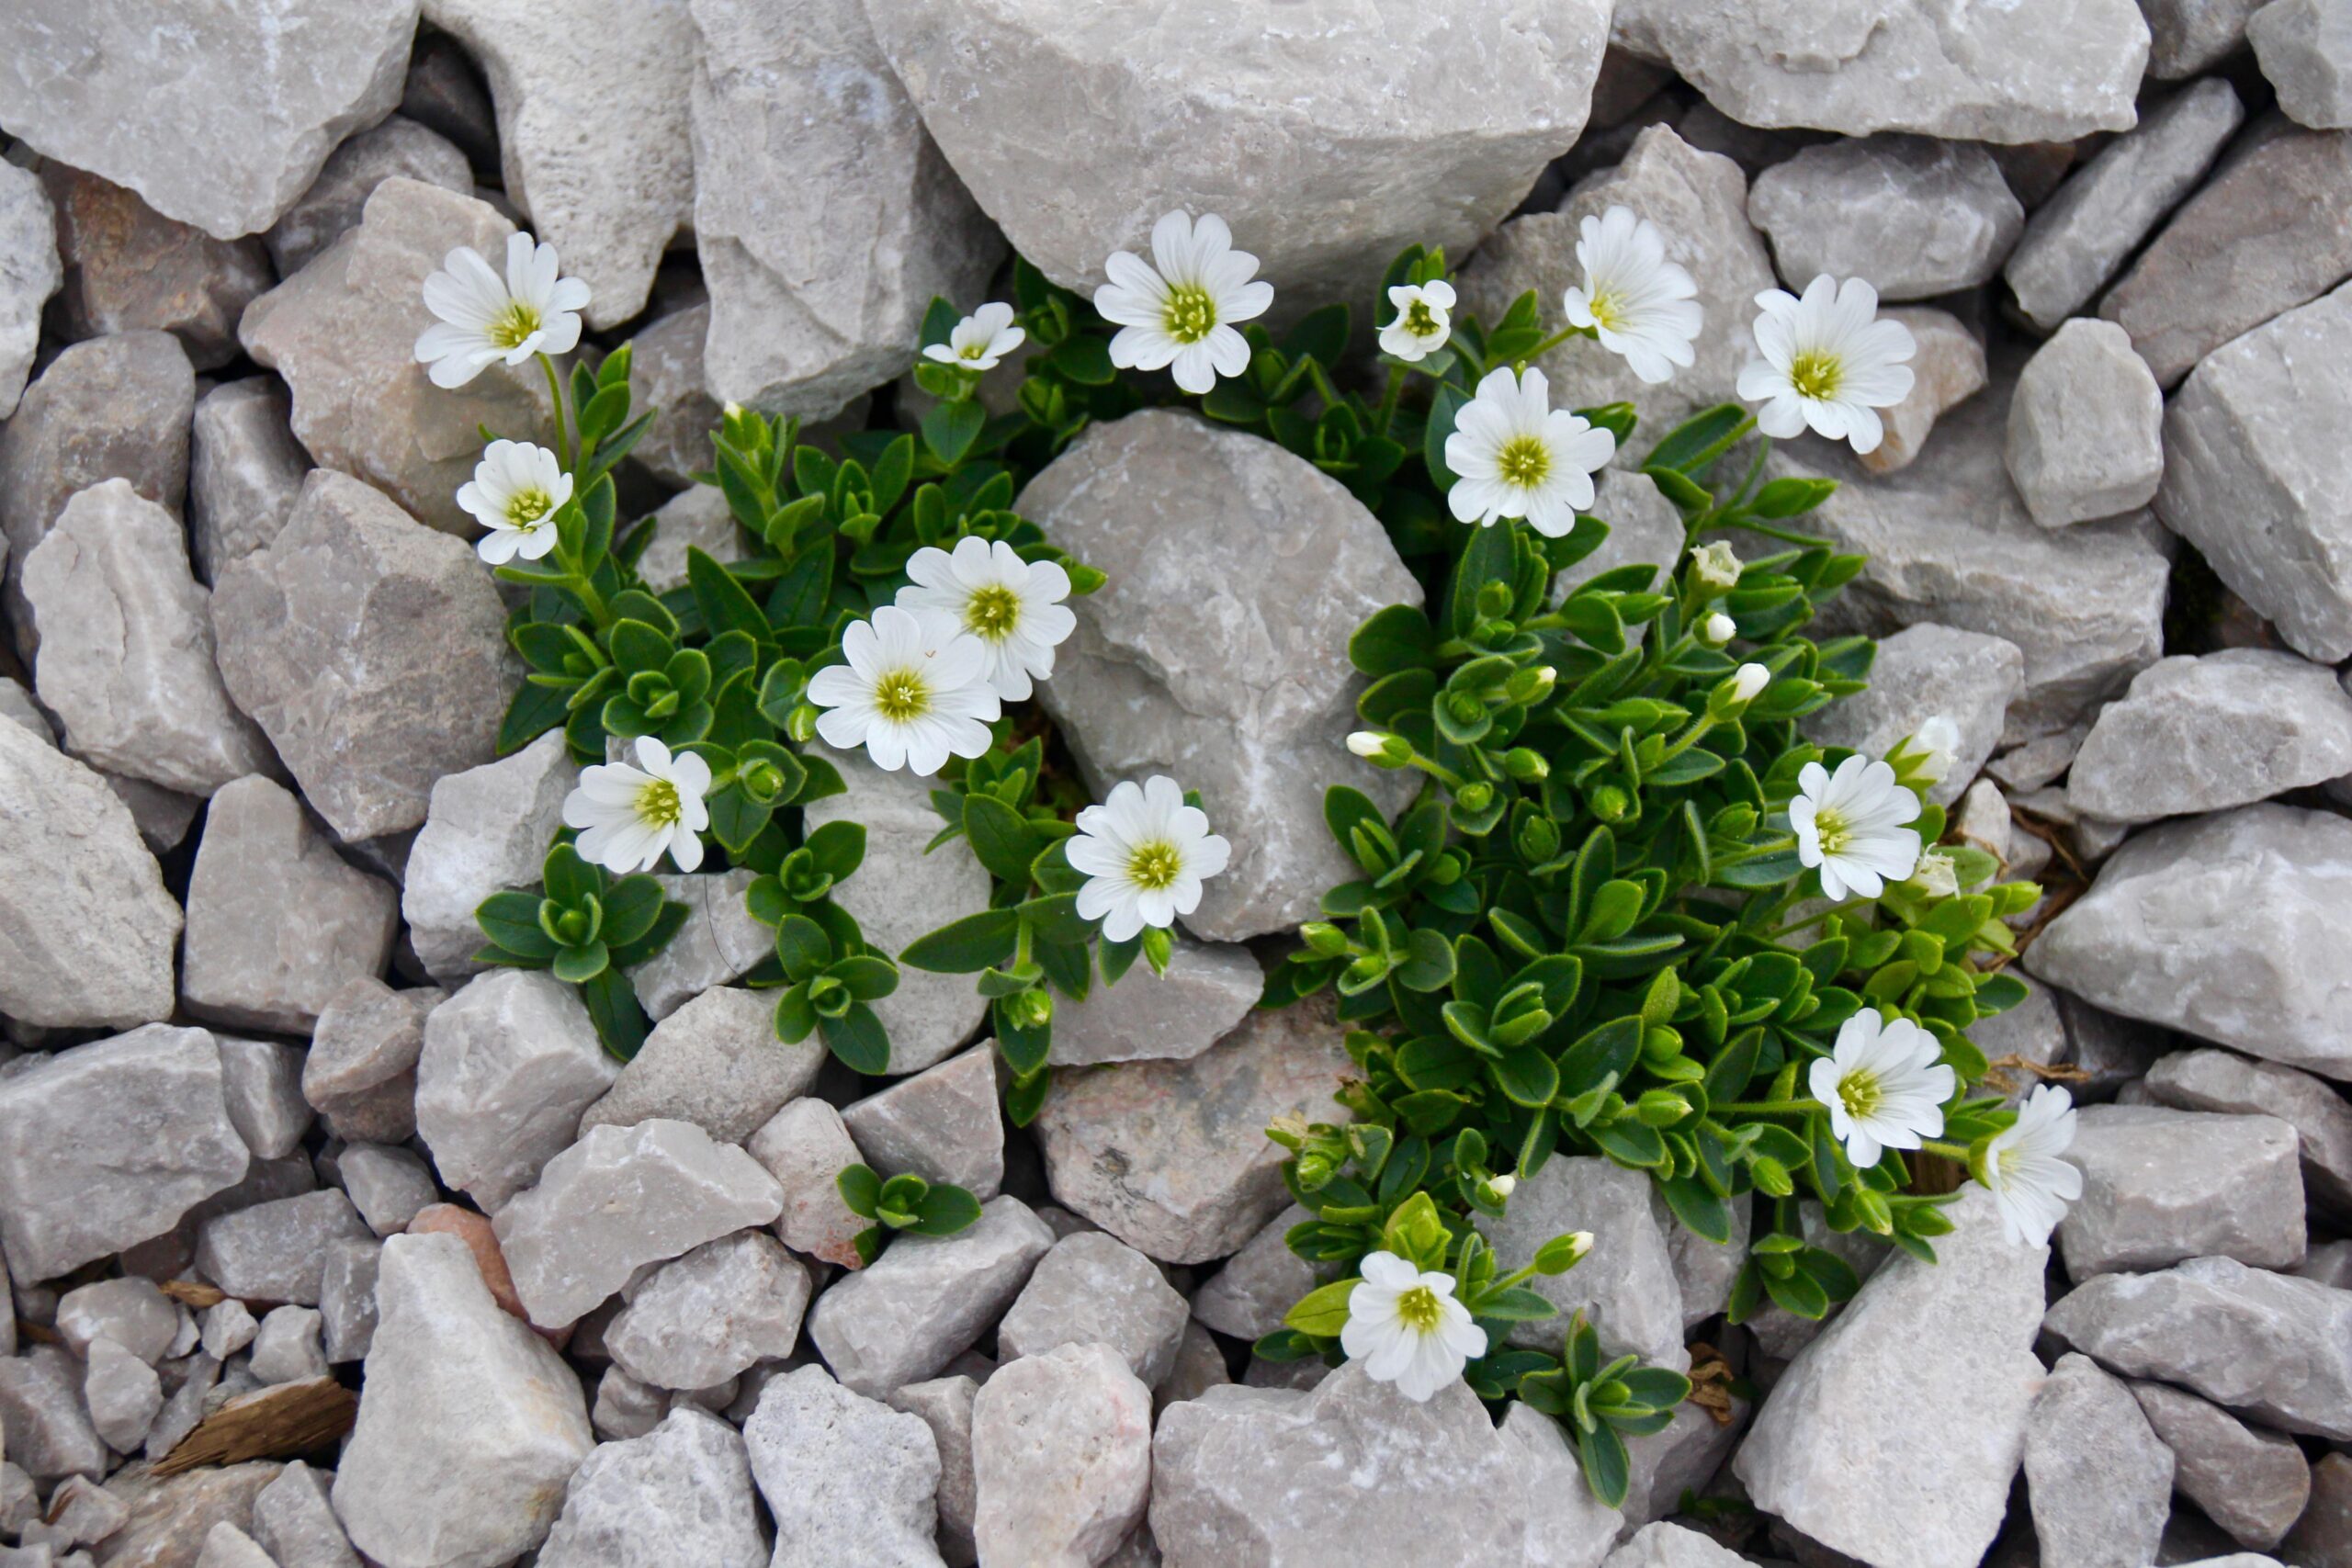 chickweed plant growing in the rocks, white flowers and leaves